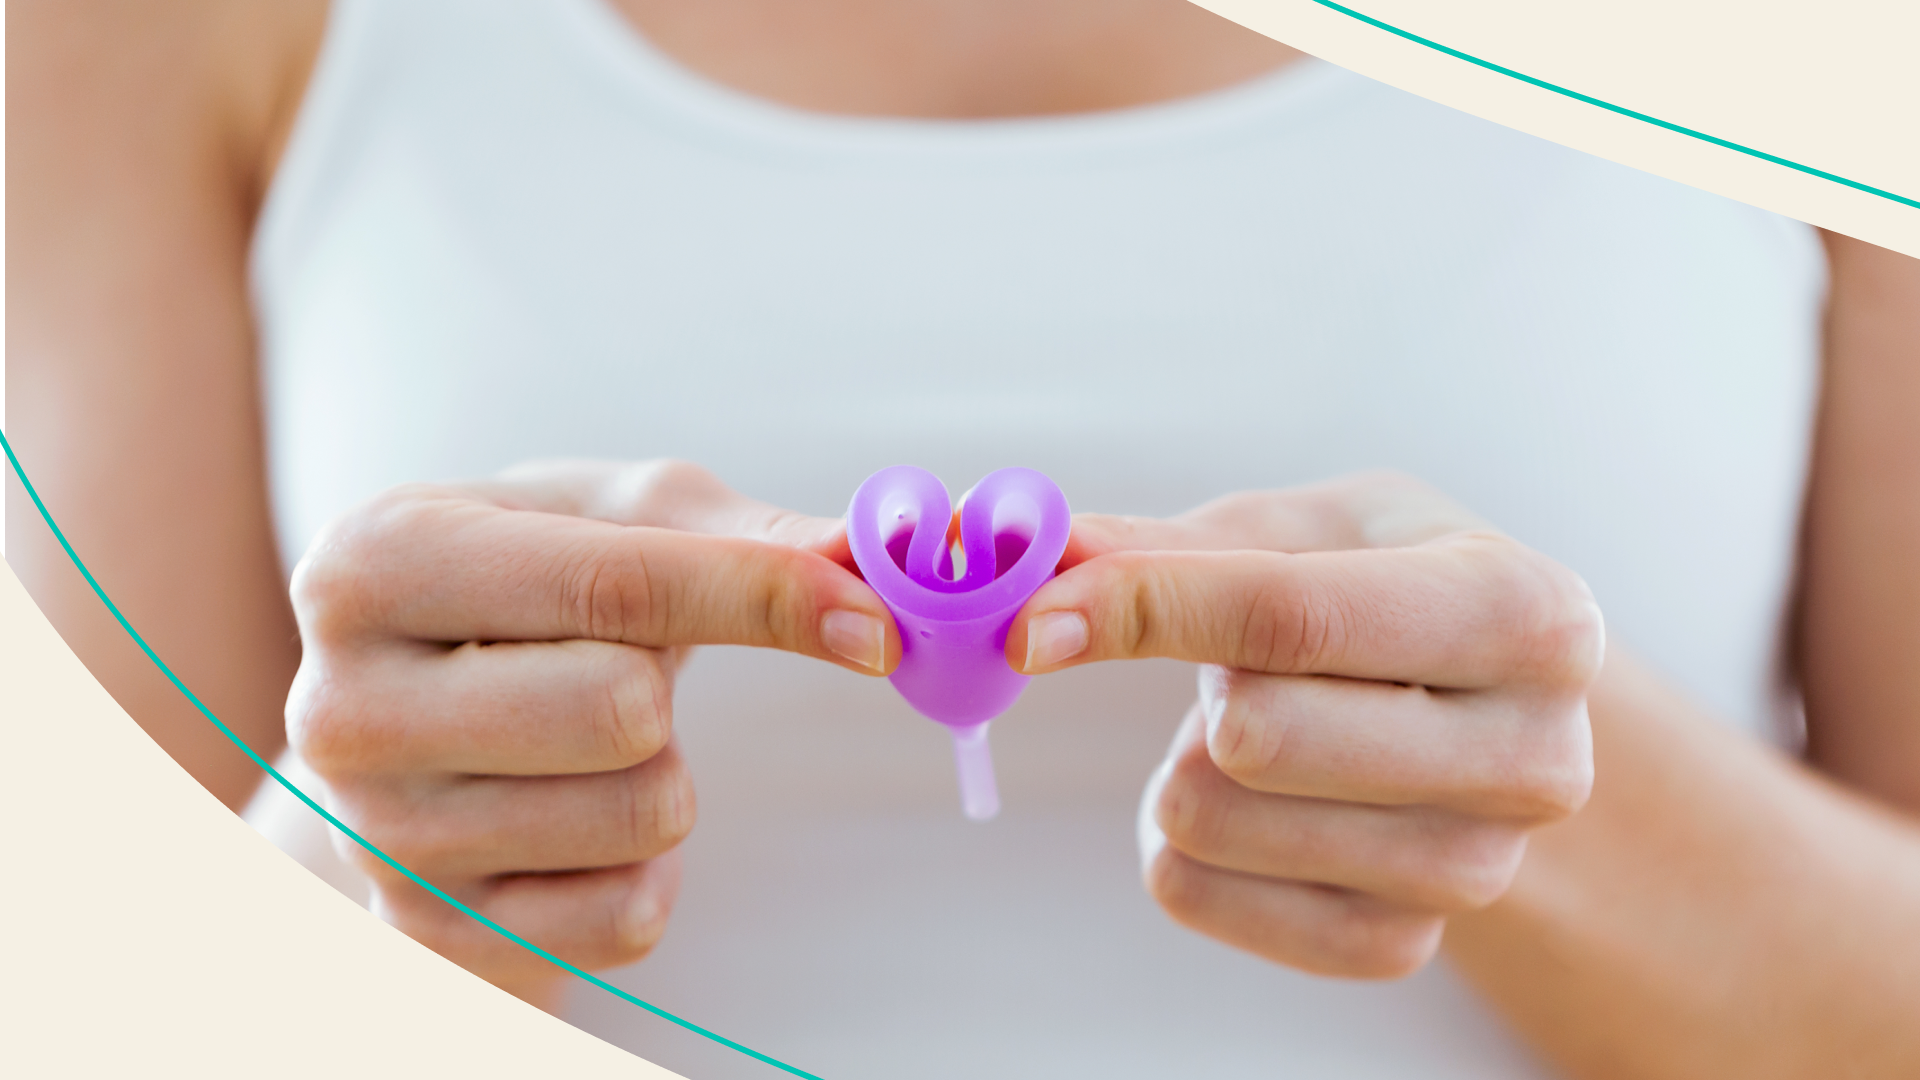 How to insert or wear a menstrual cup for beginners? How to use and remove  menstrual cup?